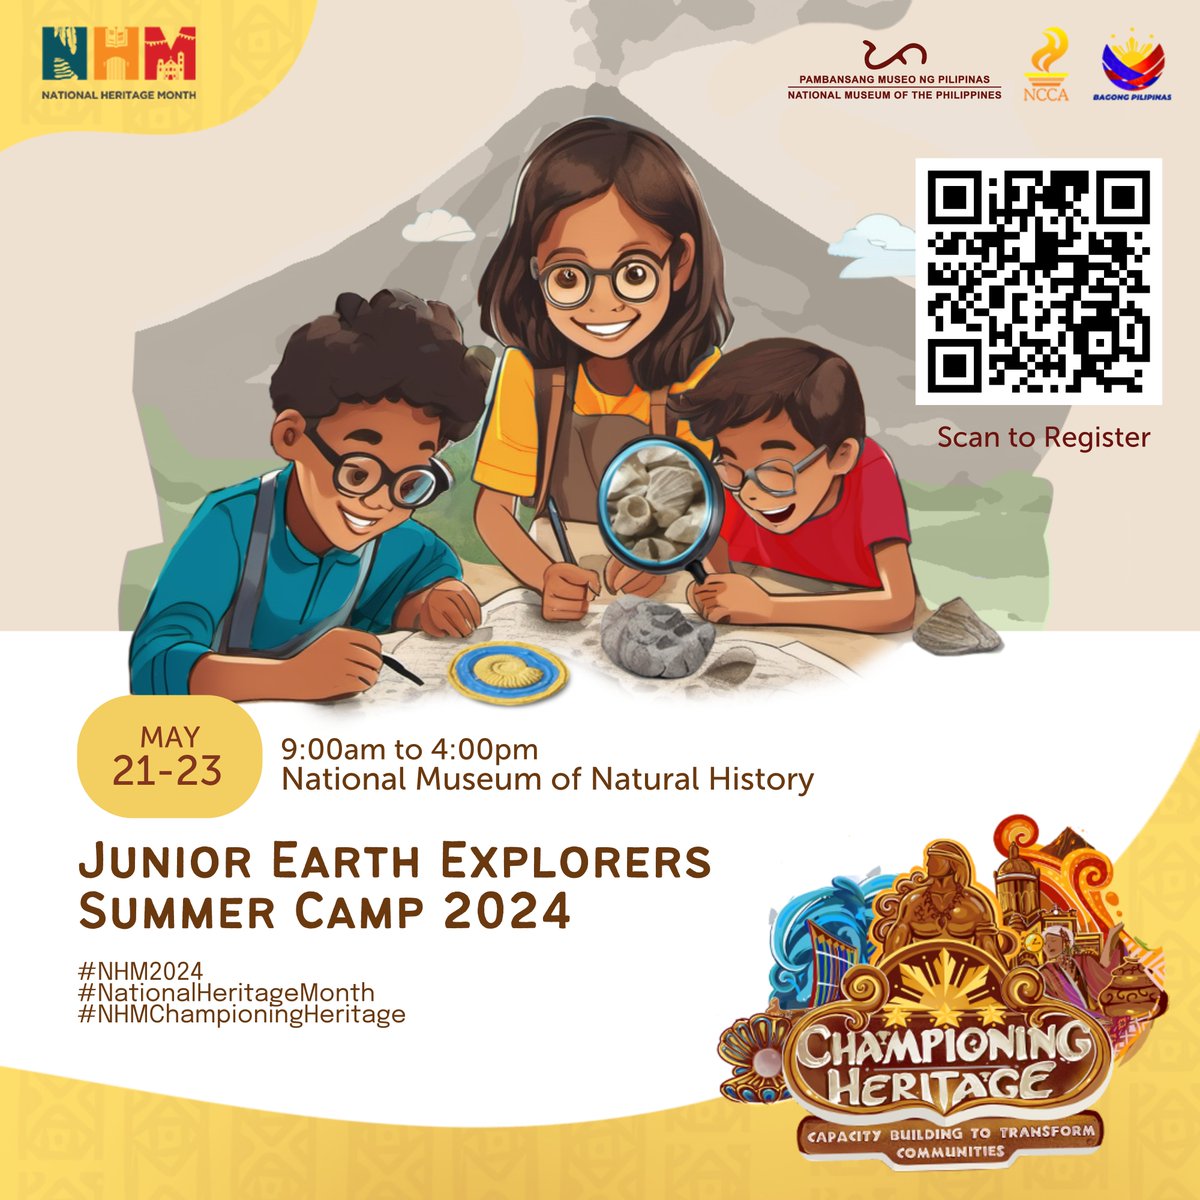 Explore the wonders of Earth with us this NHM! We invite you on a voyage through our Junior Earth Explorers Summer Camp 2024! Engage in educational activities and hands-on projects to pique your curiosity in earth sciences! REGISTER: bit.ly/nmpsciencecamp… #NationalMuseumPH